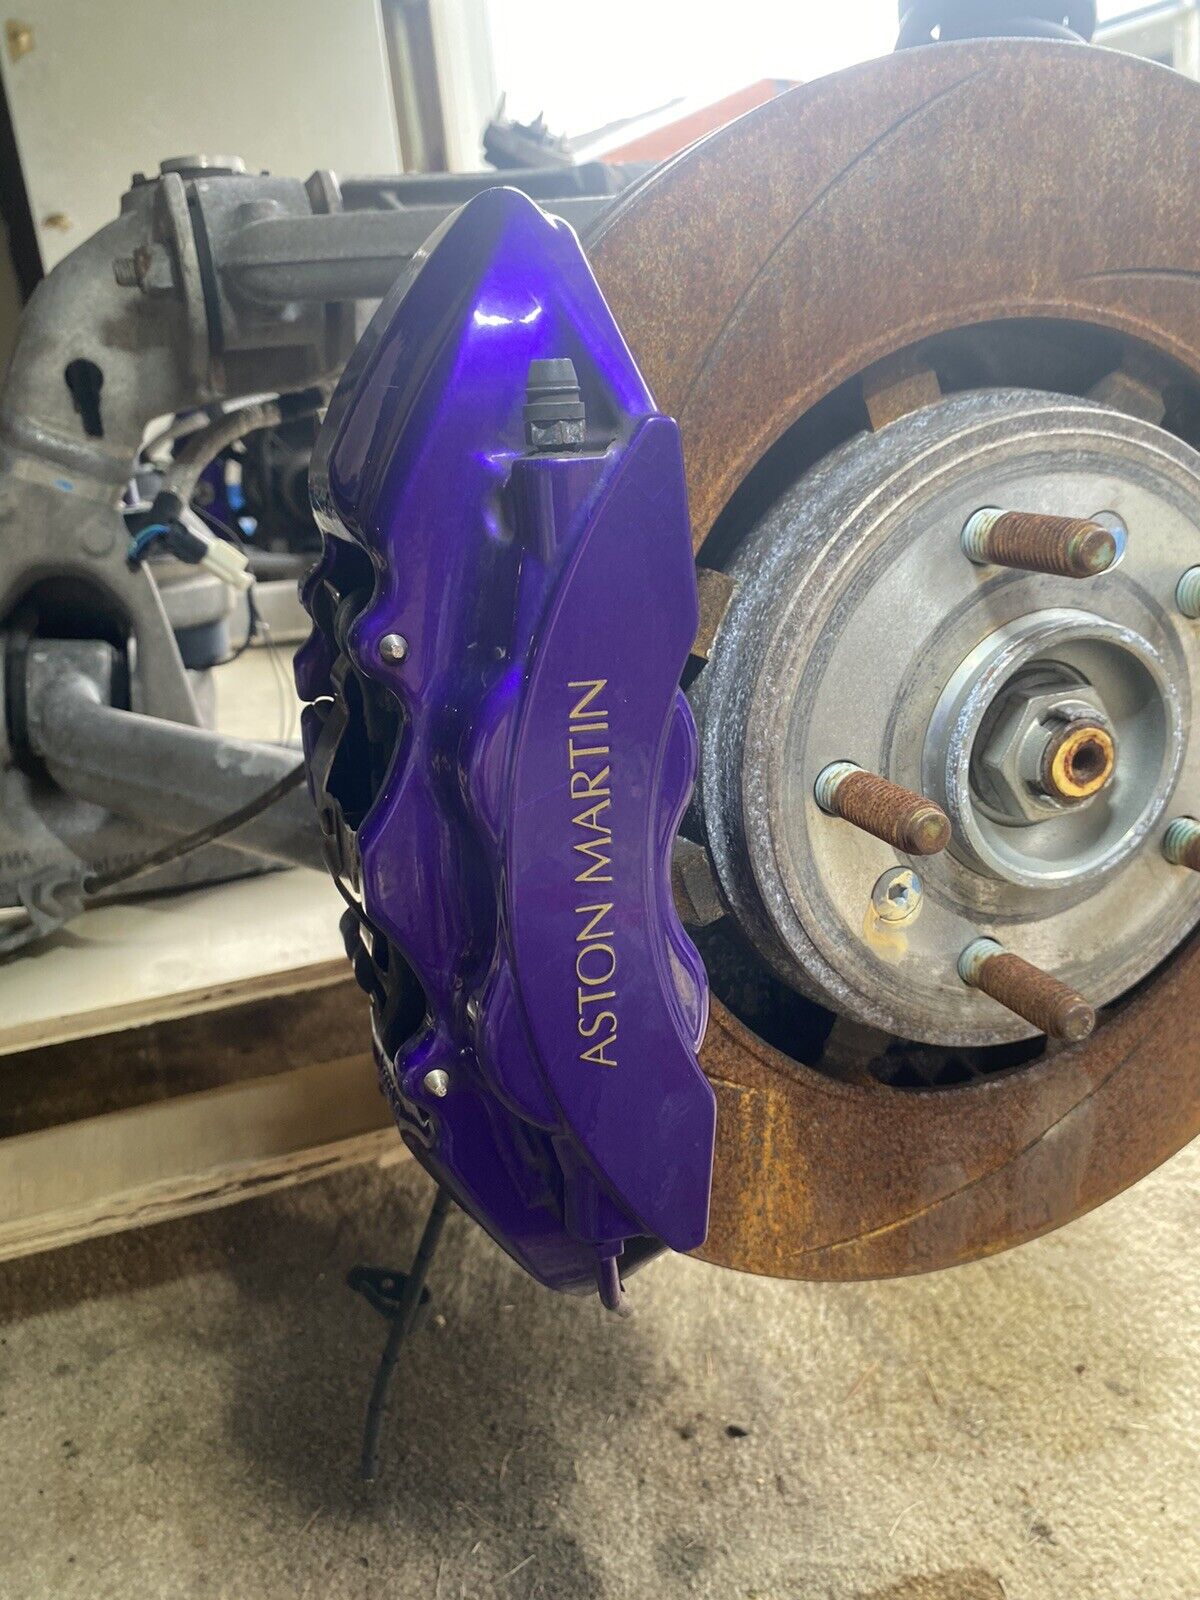 Rear Aston Martin Rapide Brake Calipers, Exotic Purple Color (CALIPERS ONLY)